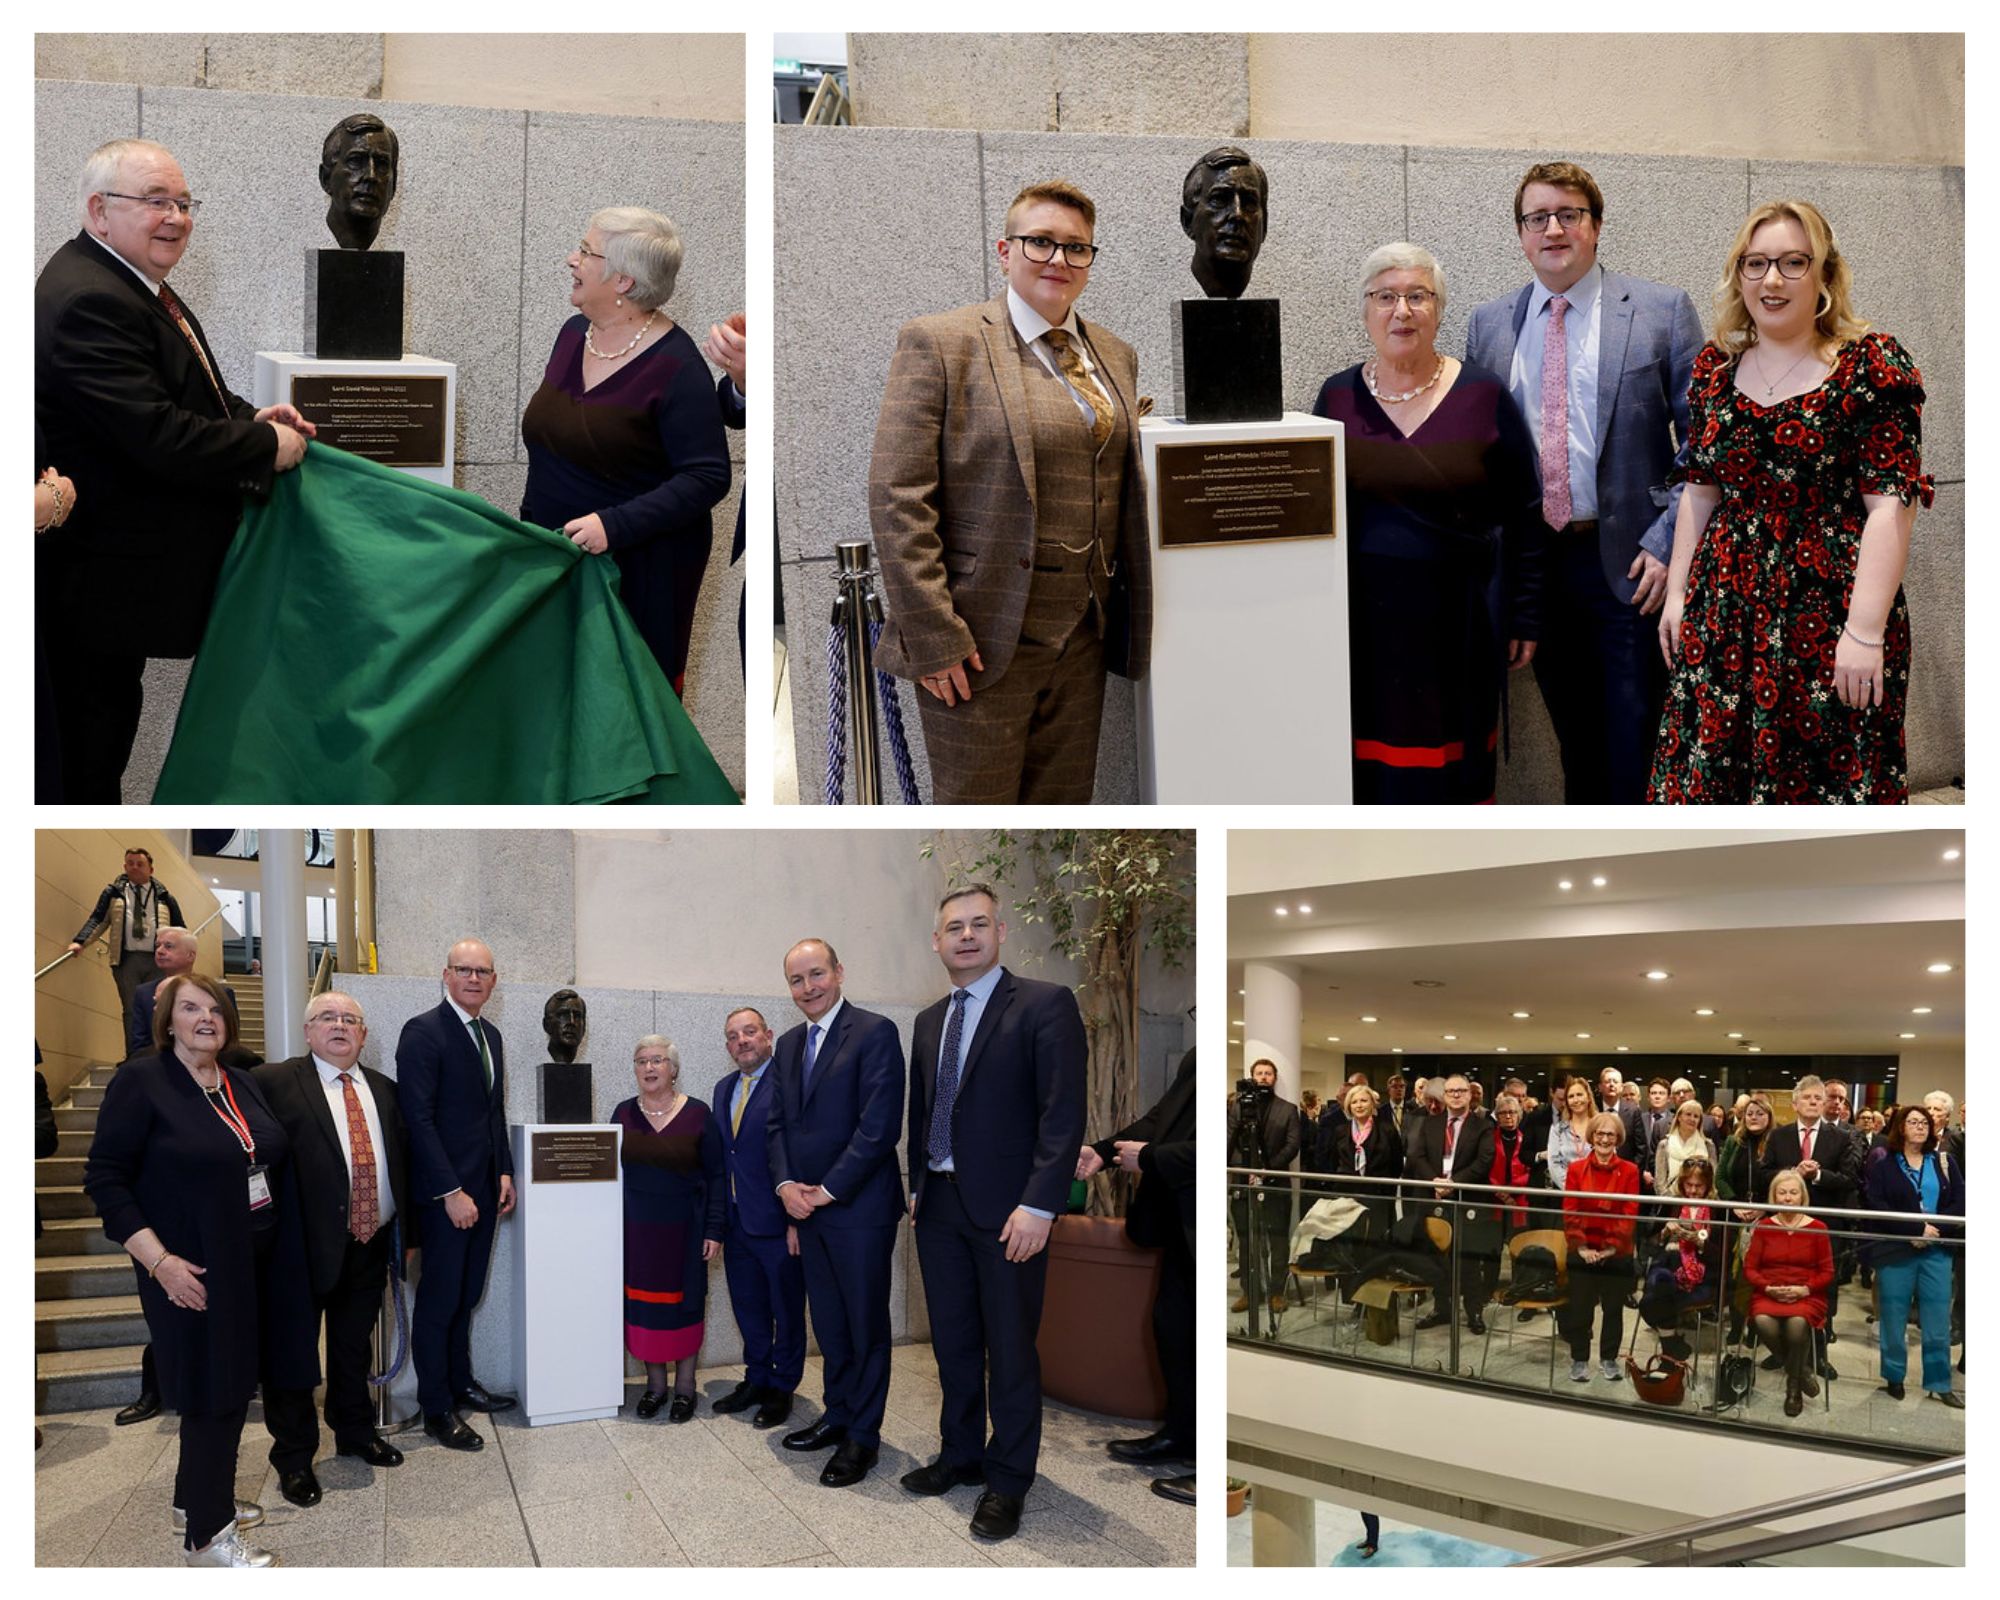 Attendees at the event unveiling a bust of Lord David Trimble in Leinster House